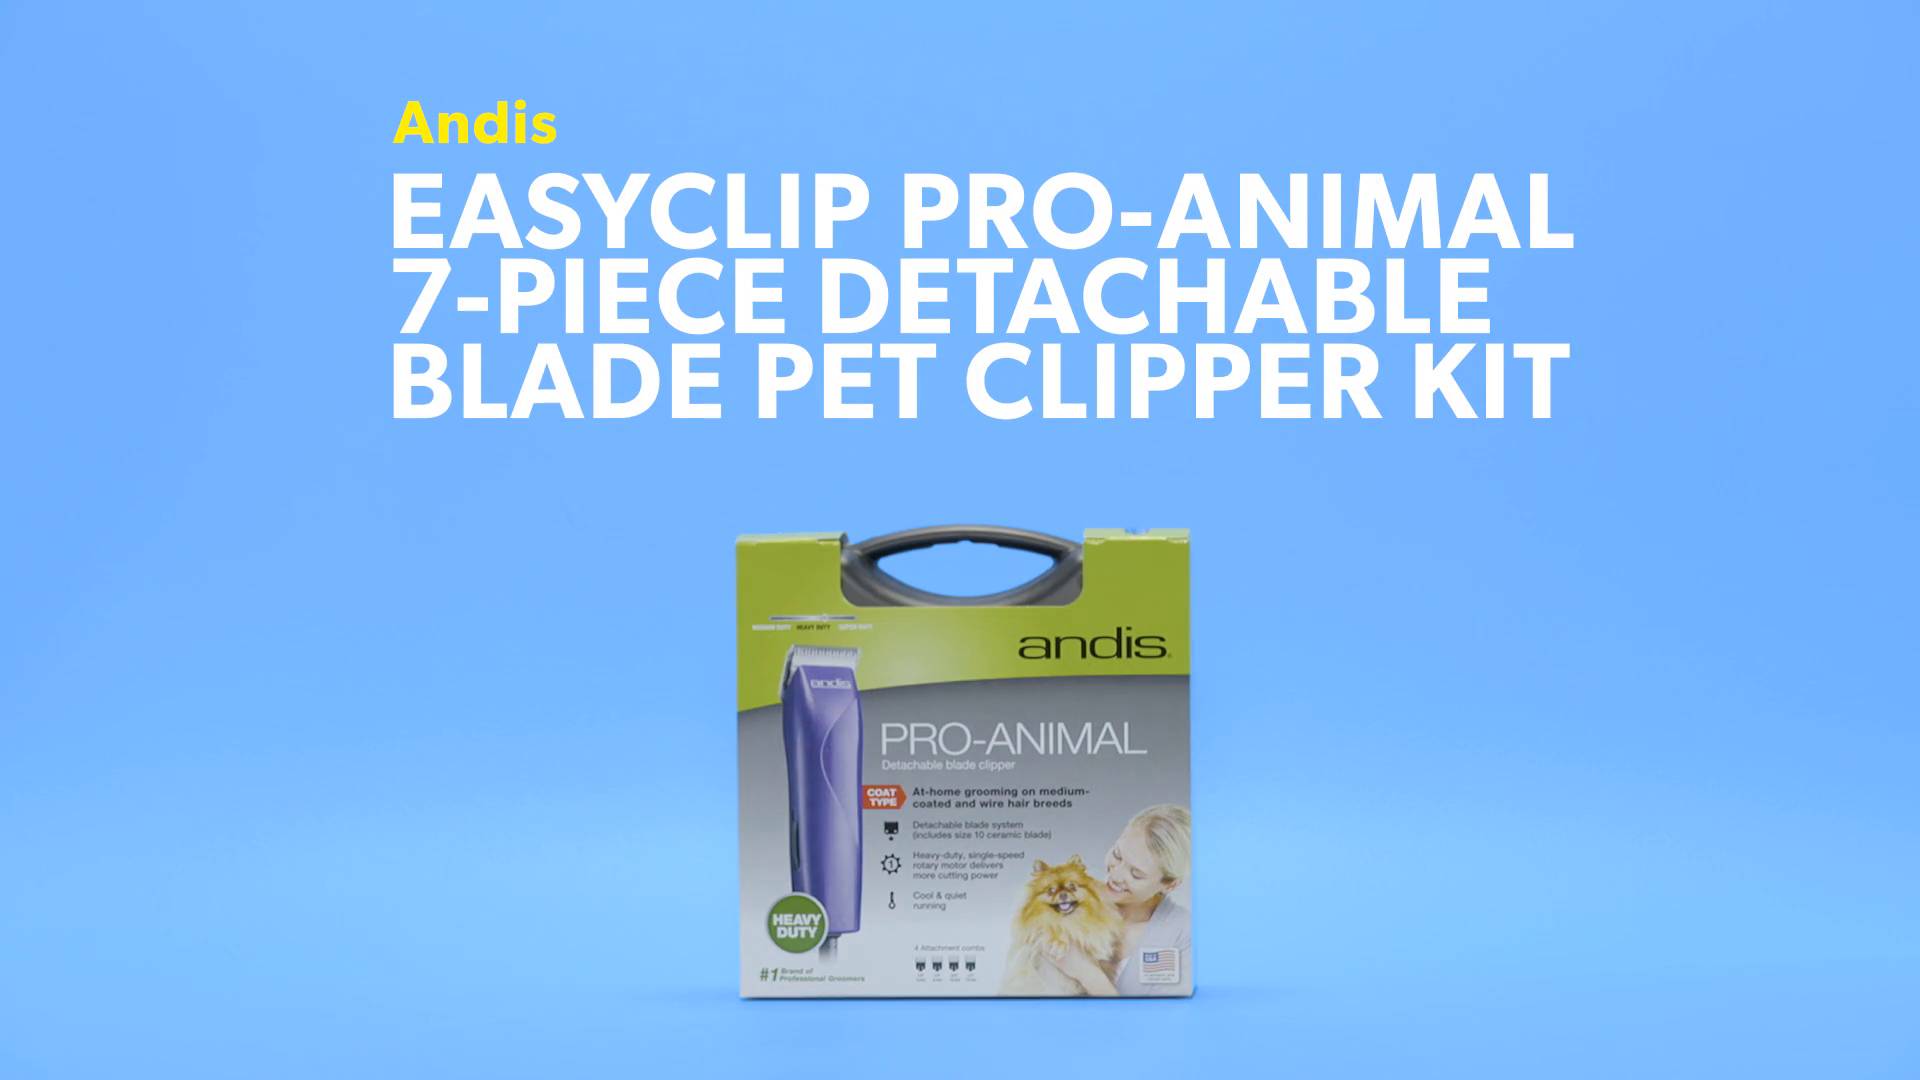 andis easy clip groom detachable blade clipper kit